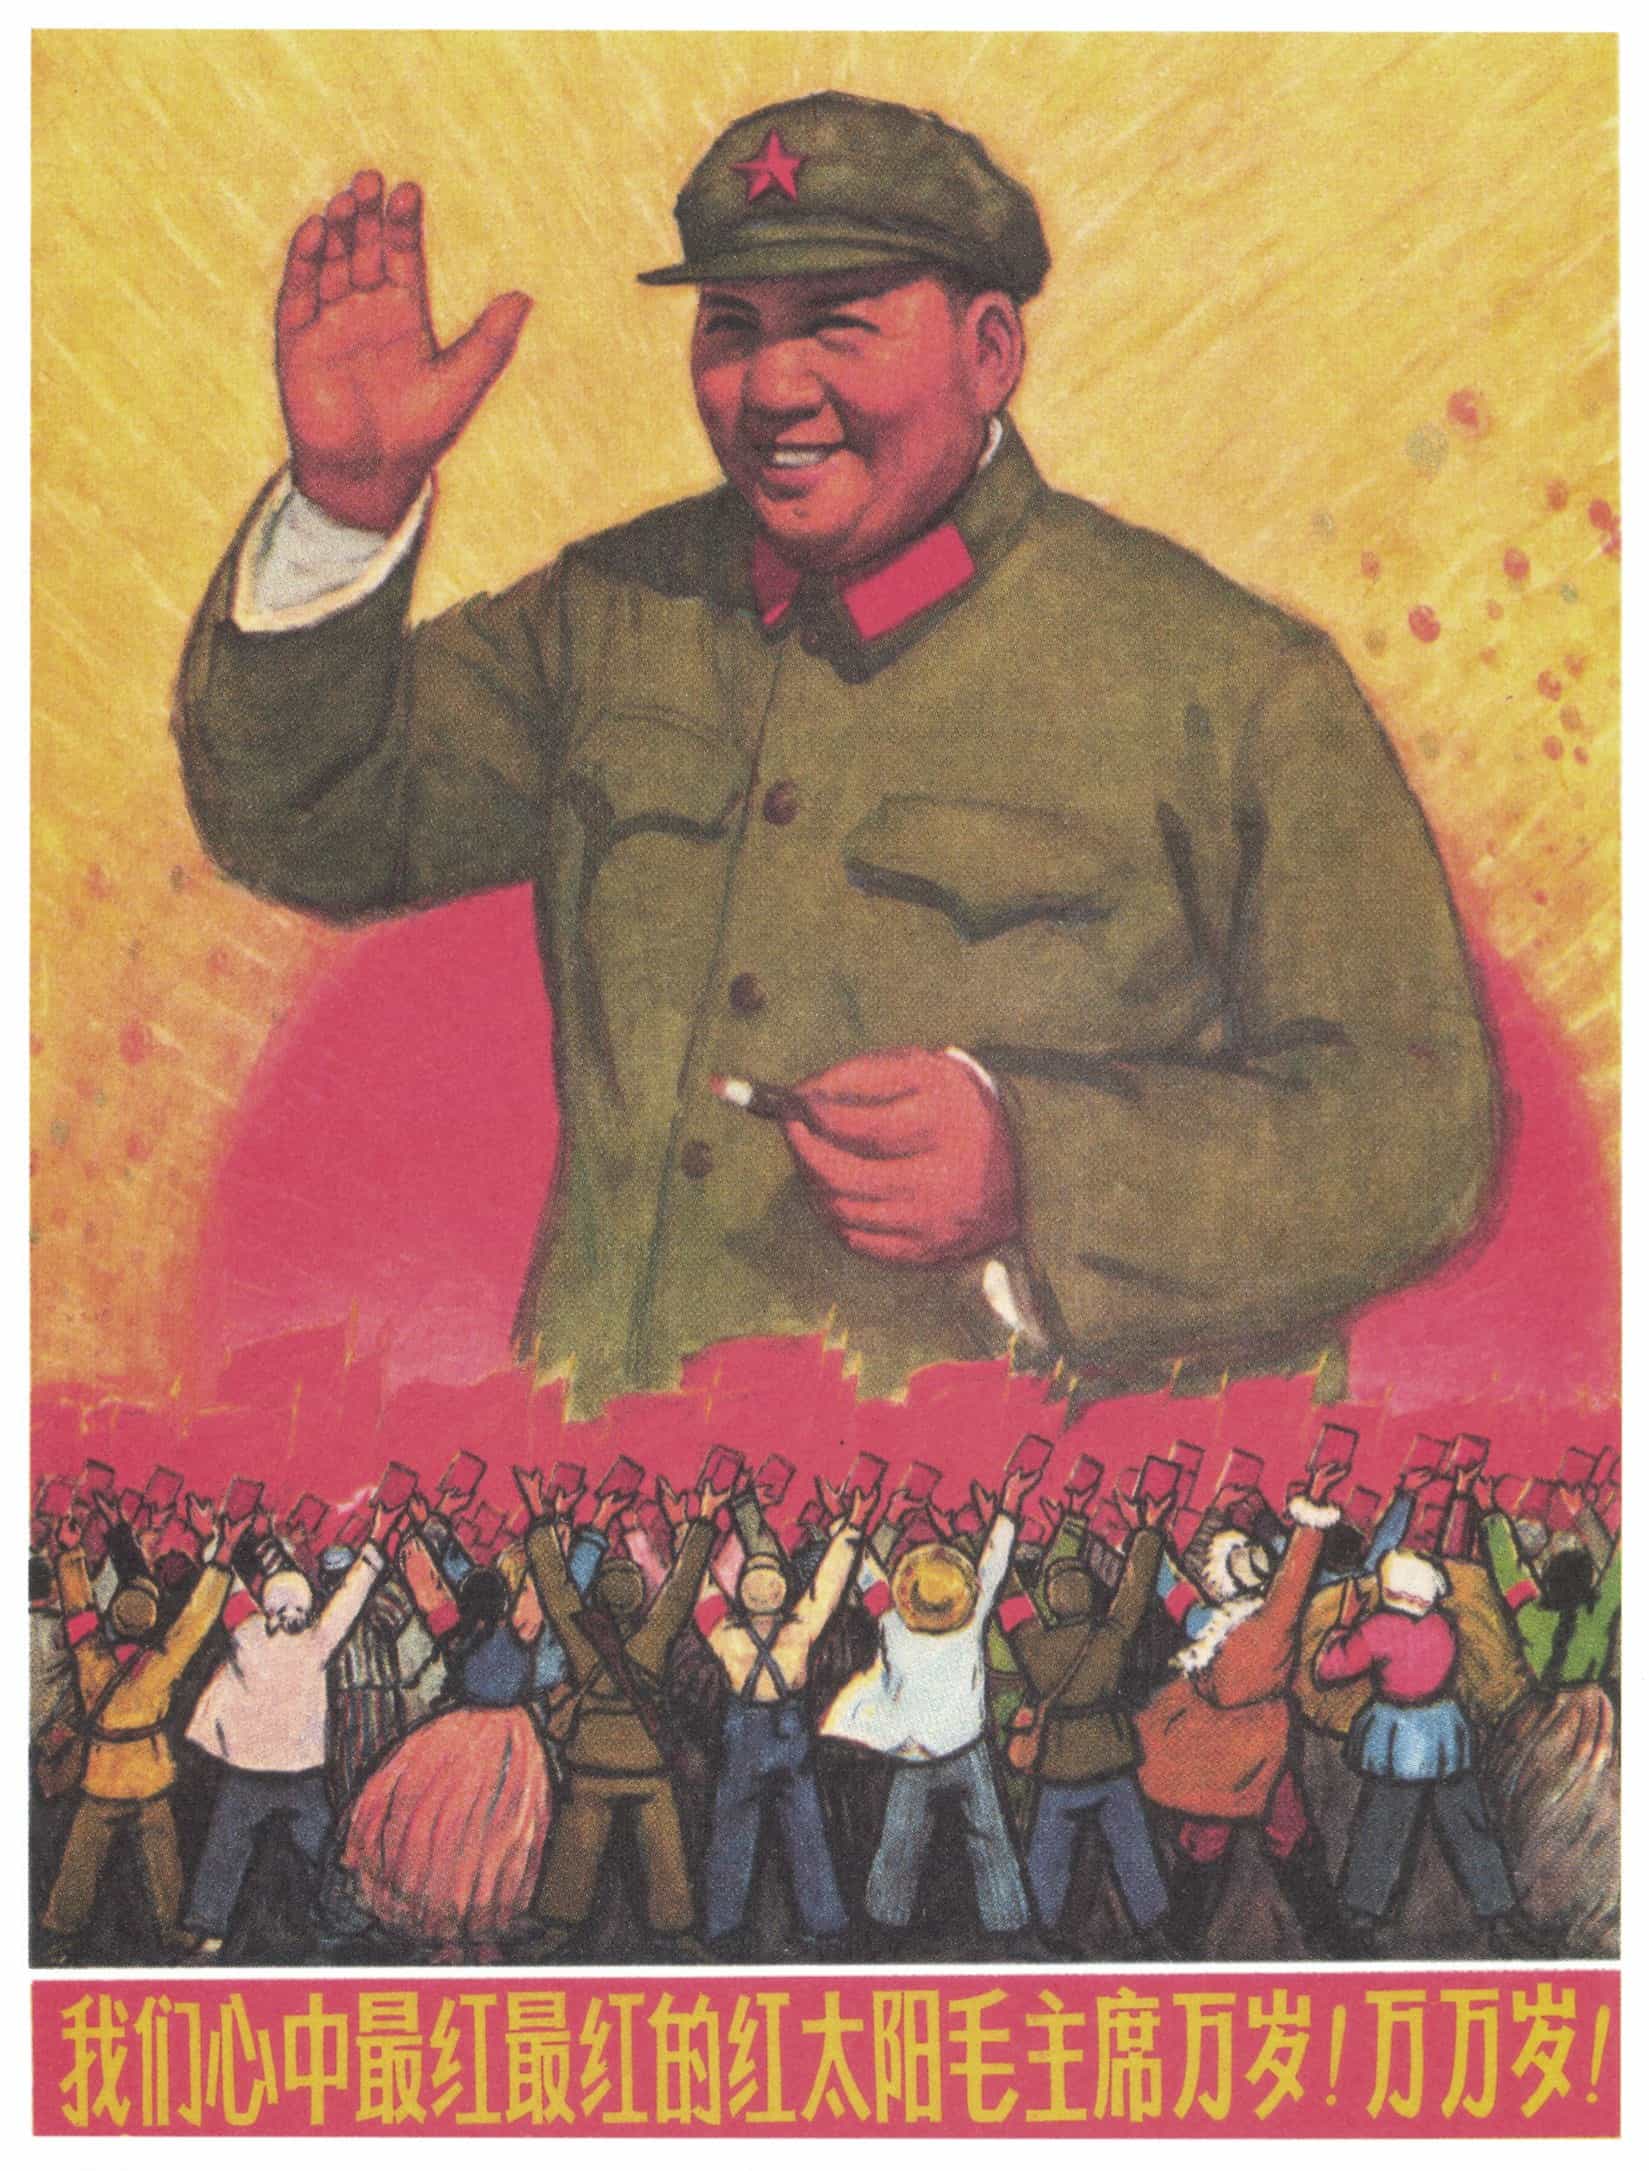 Long-Live-Chairman-Mao-the-Reddest-Sun-in-Our-Hearts-1967.jpg